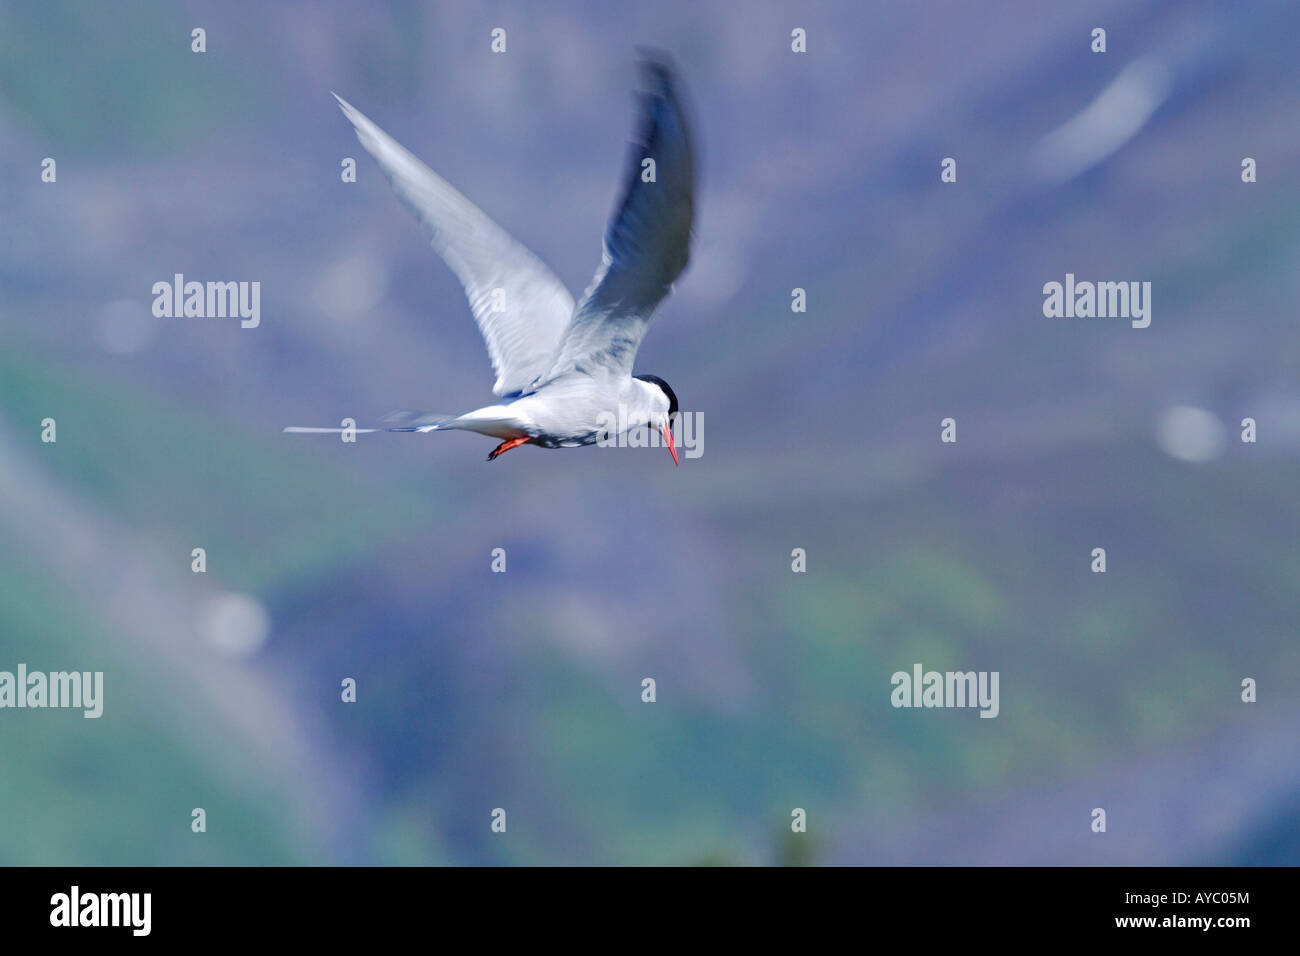 USA, Alaska. Arctic tern in the Alaska Range. Arctic terns have the longest migration of all birds, travelling up to 40,000 KM/year (25,000 miles). Stock Photo